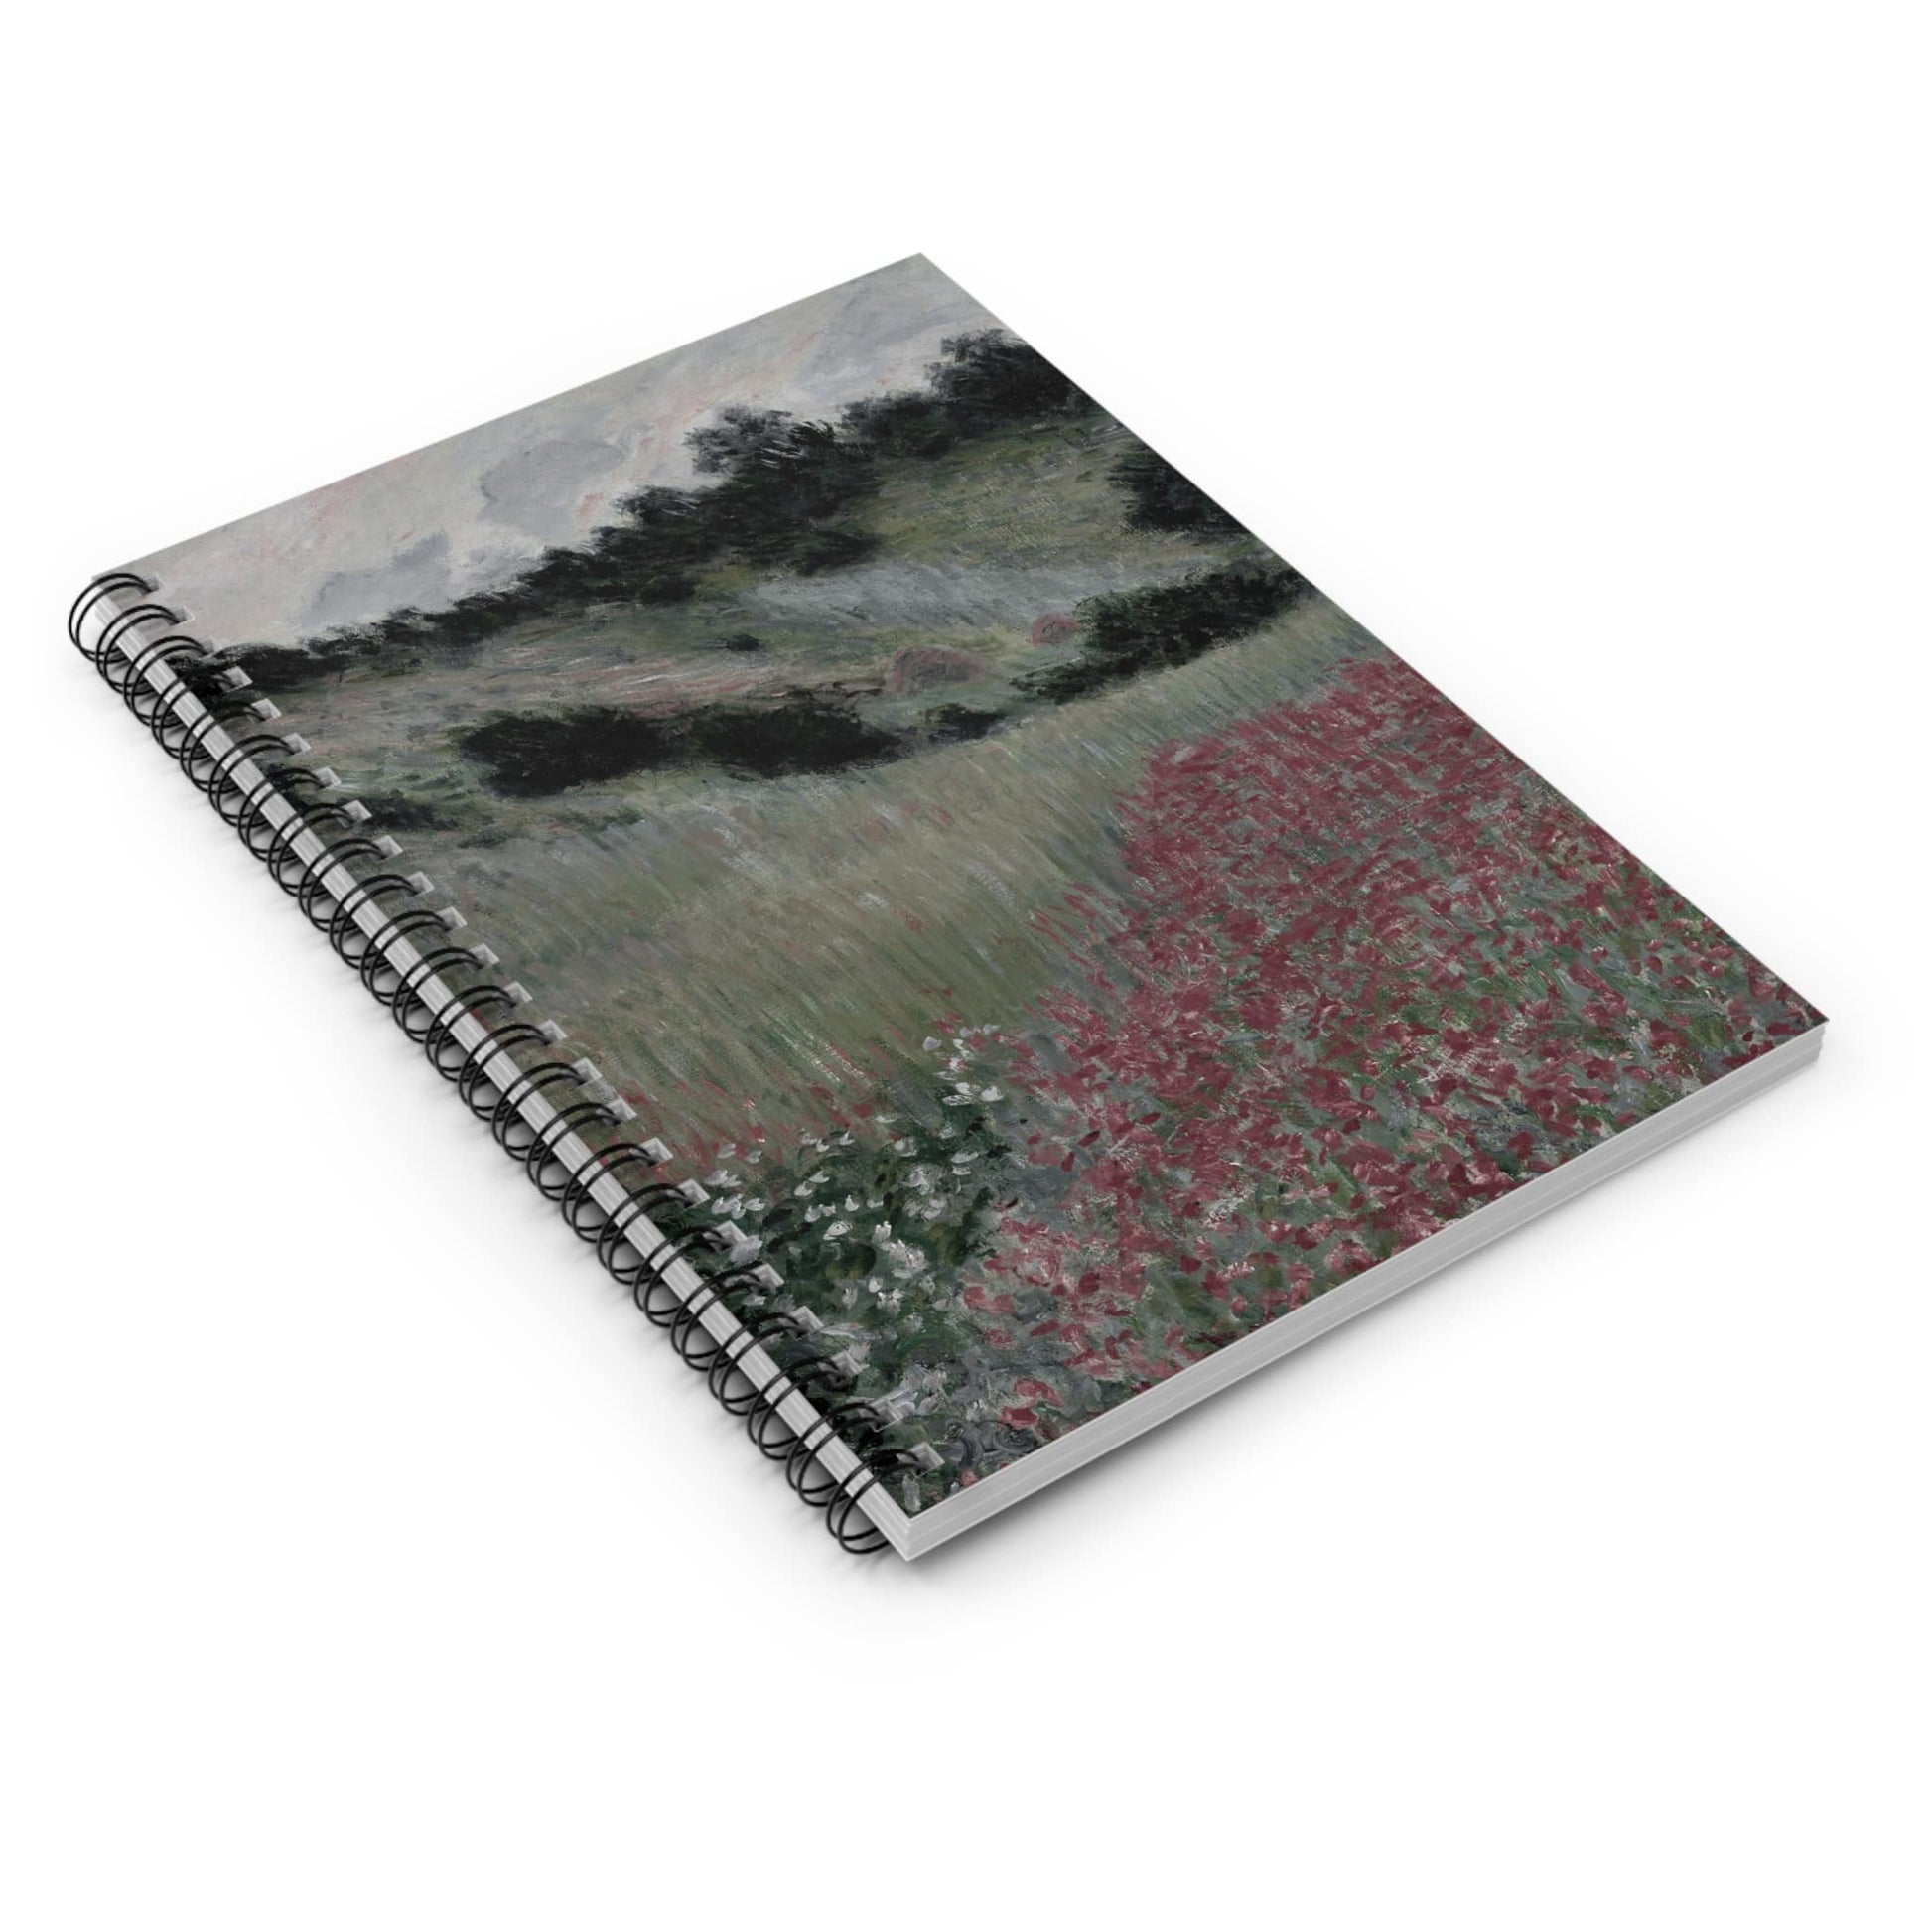 Muted Floral Landscape Spiral Notebook Laying Flat on White Surface